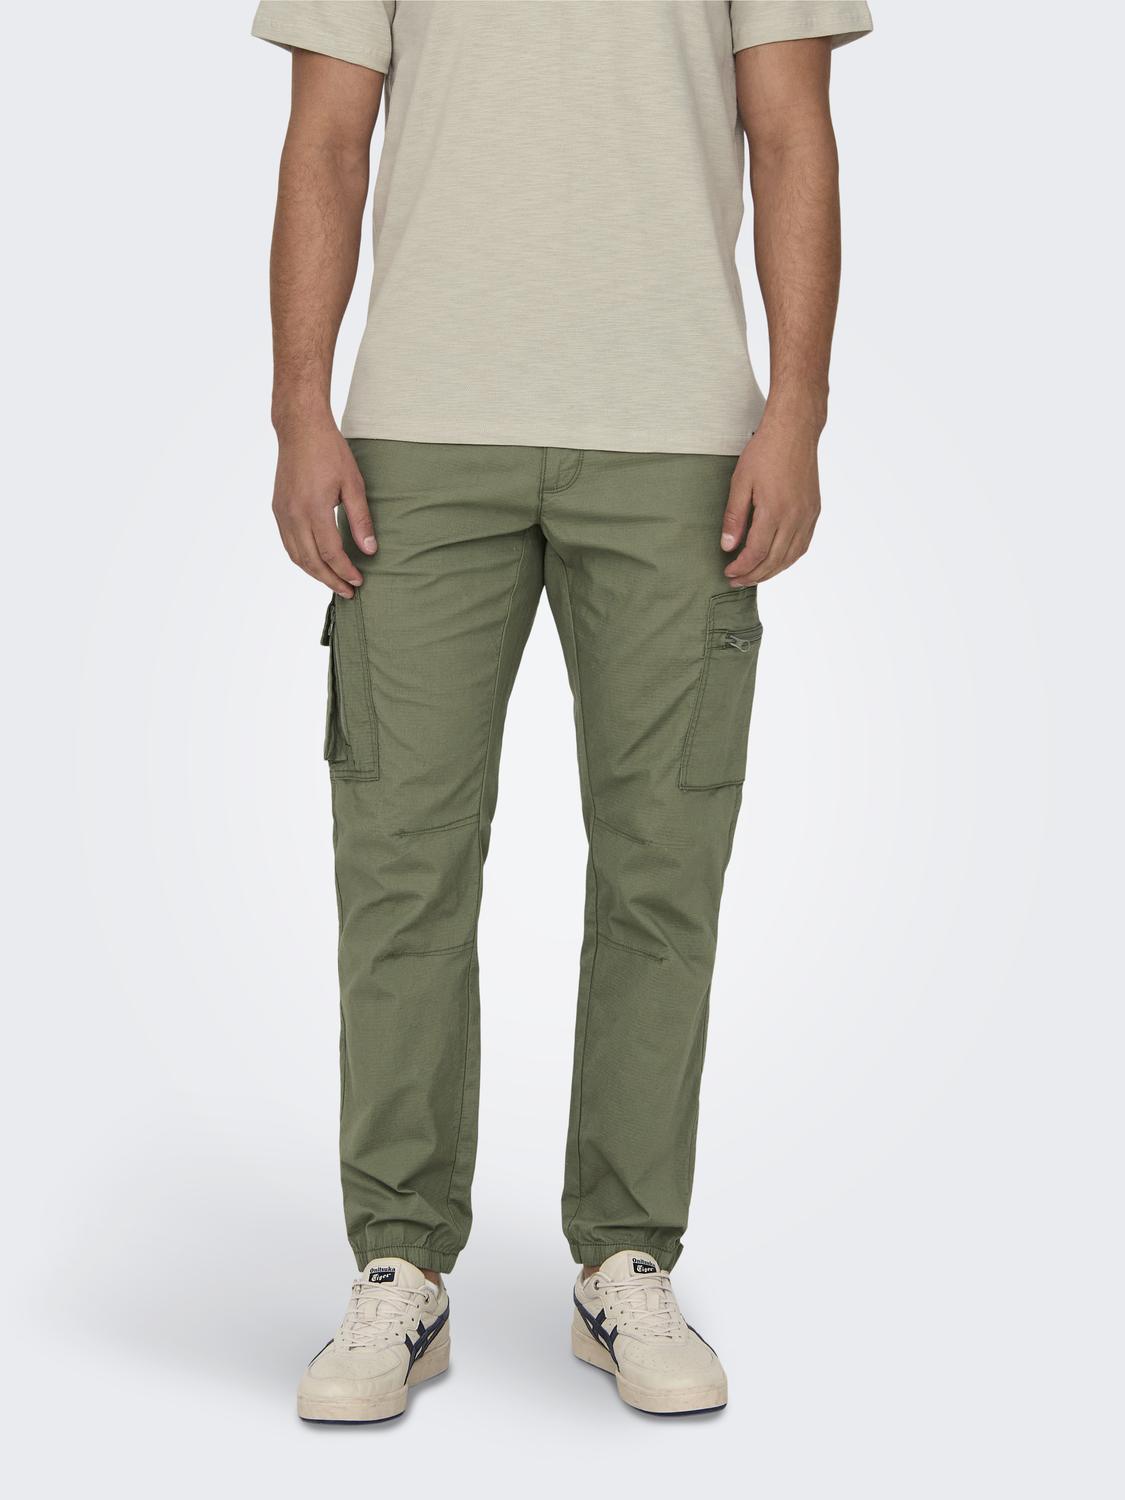 ONSCAM PAW CARGO CUFF RIBSTOP 0147 PANT